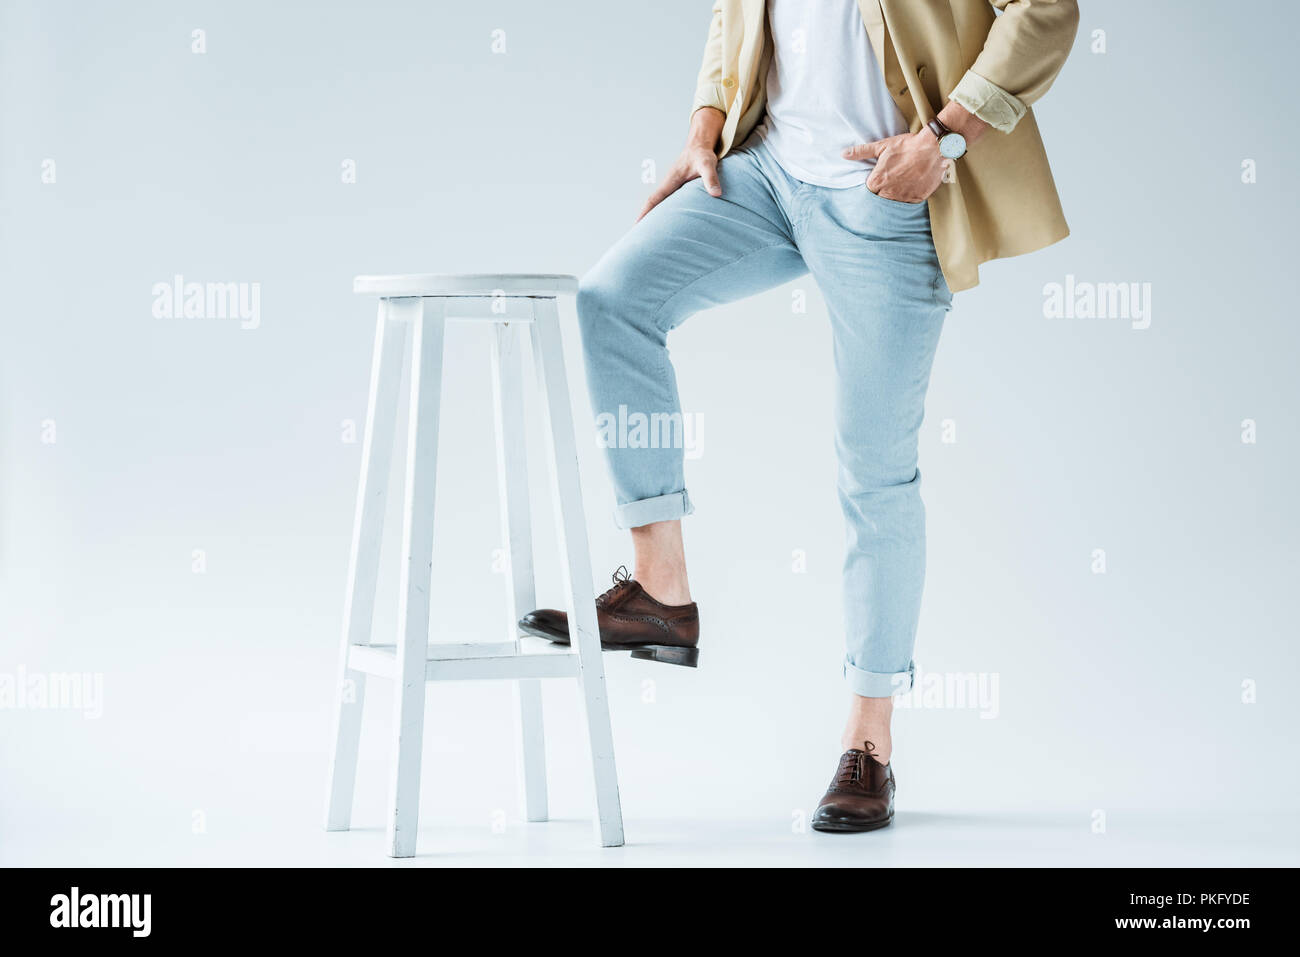 Cropped view of stylish young man leaning on stool on white background Stock Photo